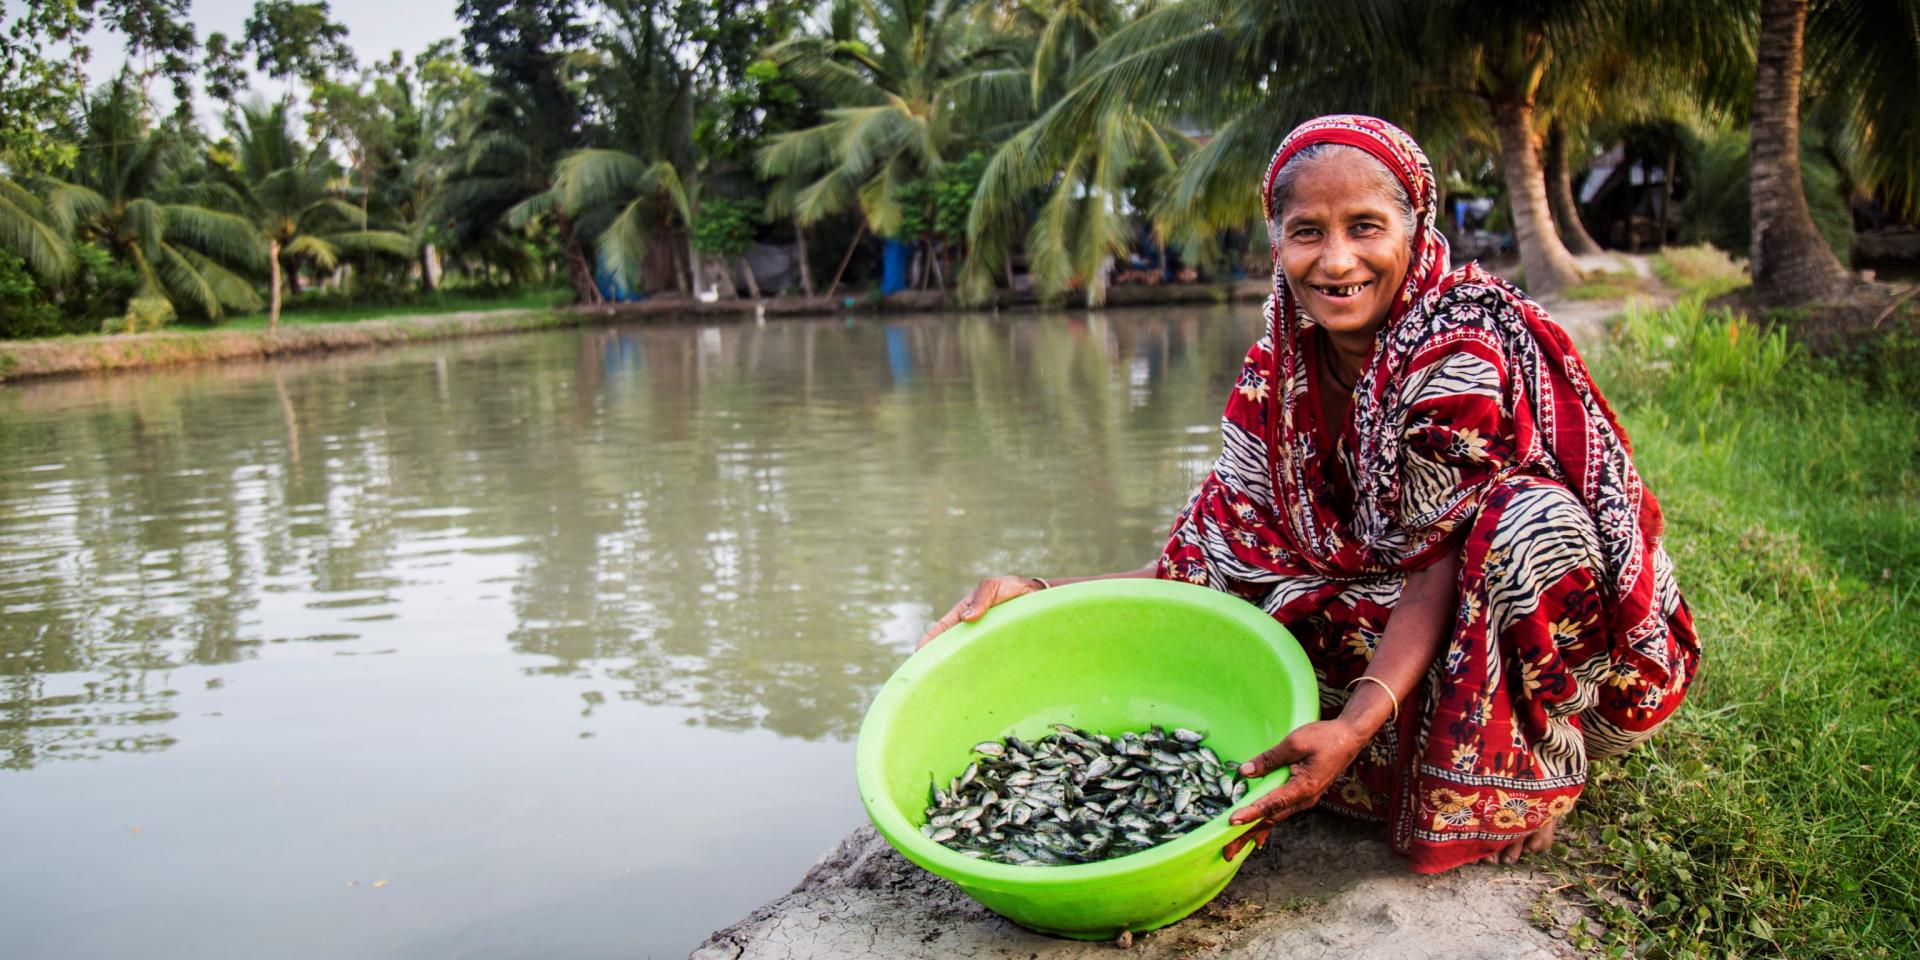 Woman with fish in Bangladesh